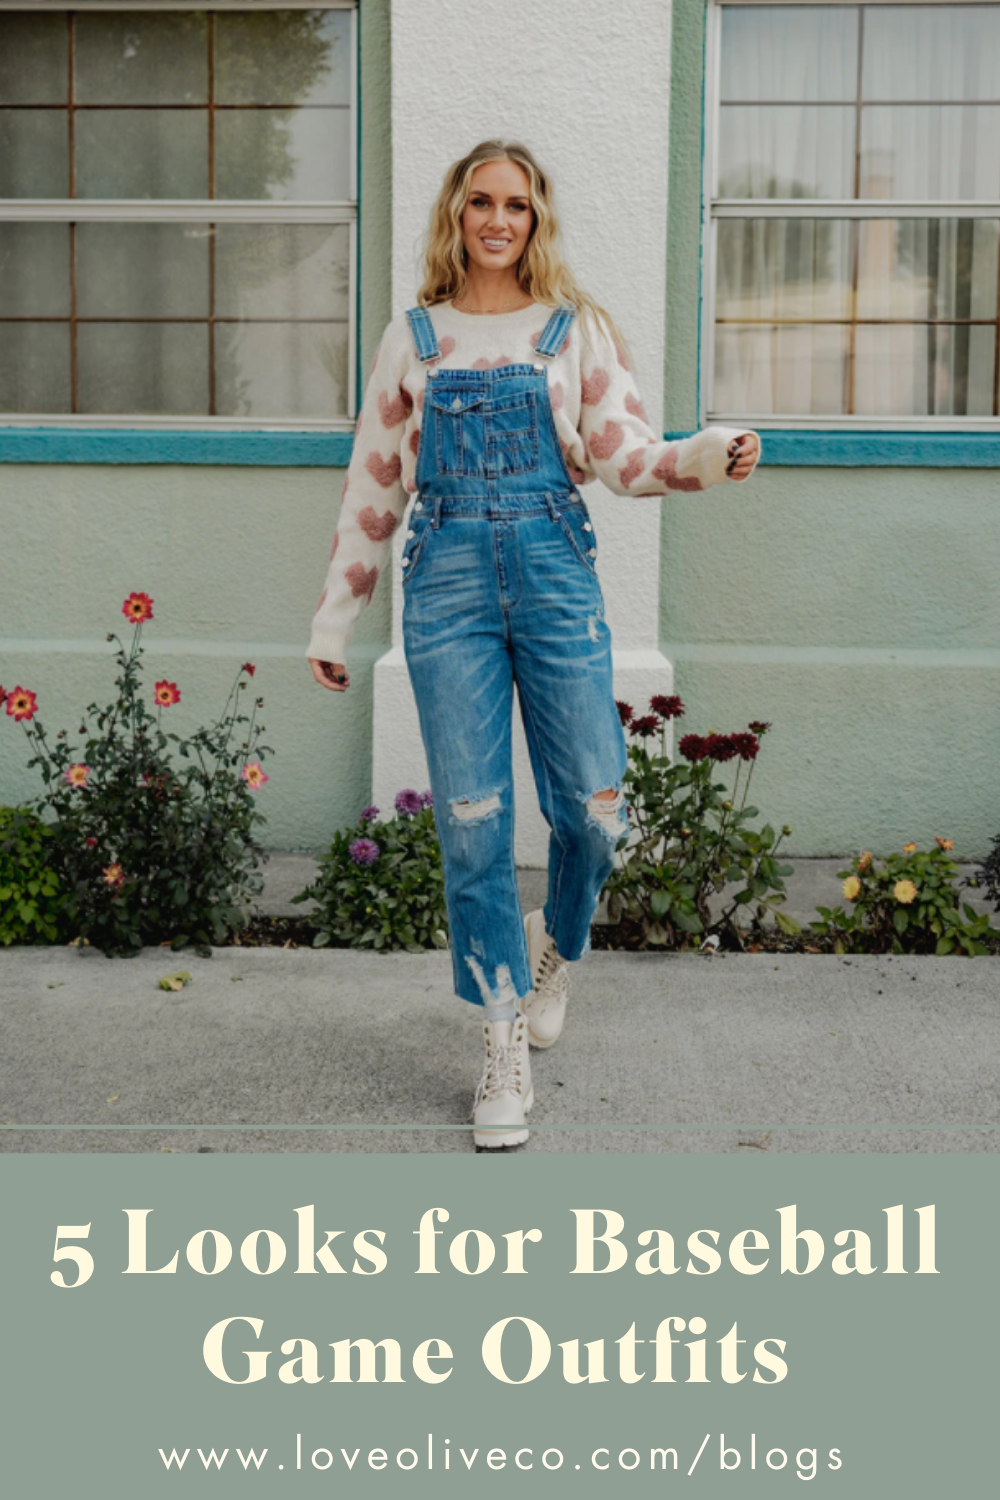 5 Looks for Baseball Game Outfits – Love Olive Co